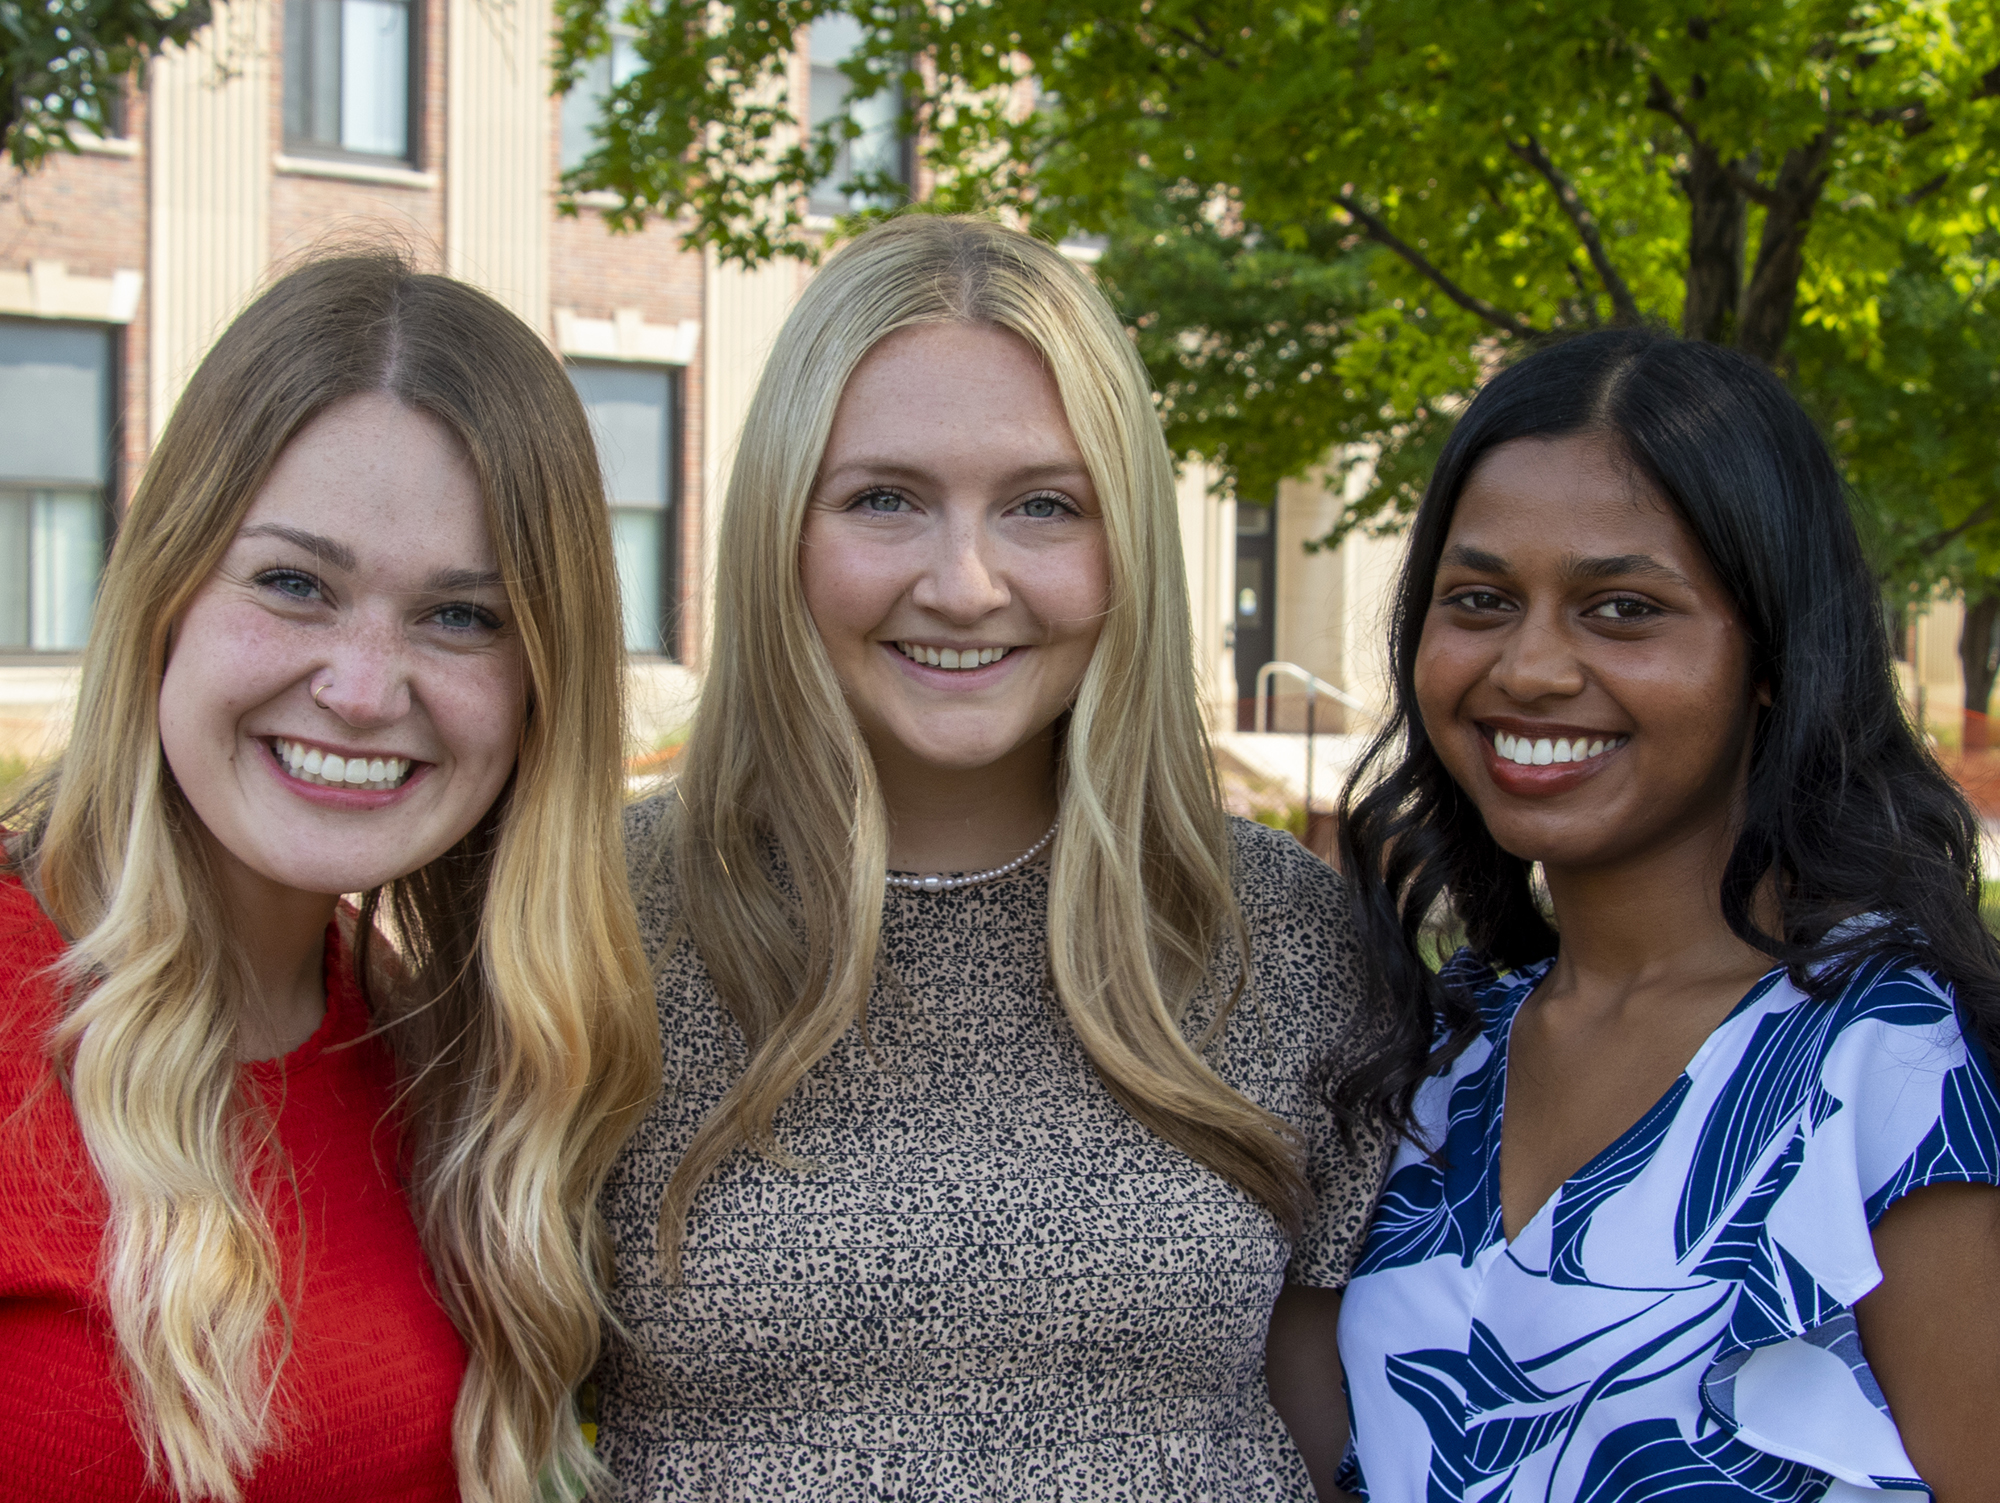 (Pictured left to right) Lydia Nielsen, Natalie Henton, and Aiswary Ganapathy Devendra Rajan are the university's Counselors-in-Residence for the 2021-22 academic year.